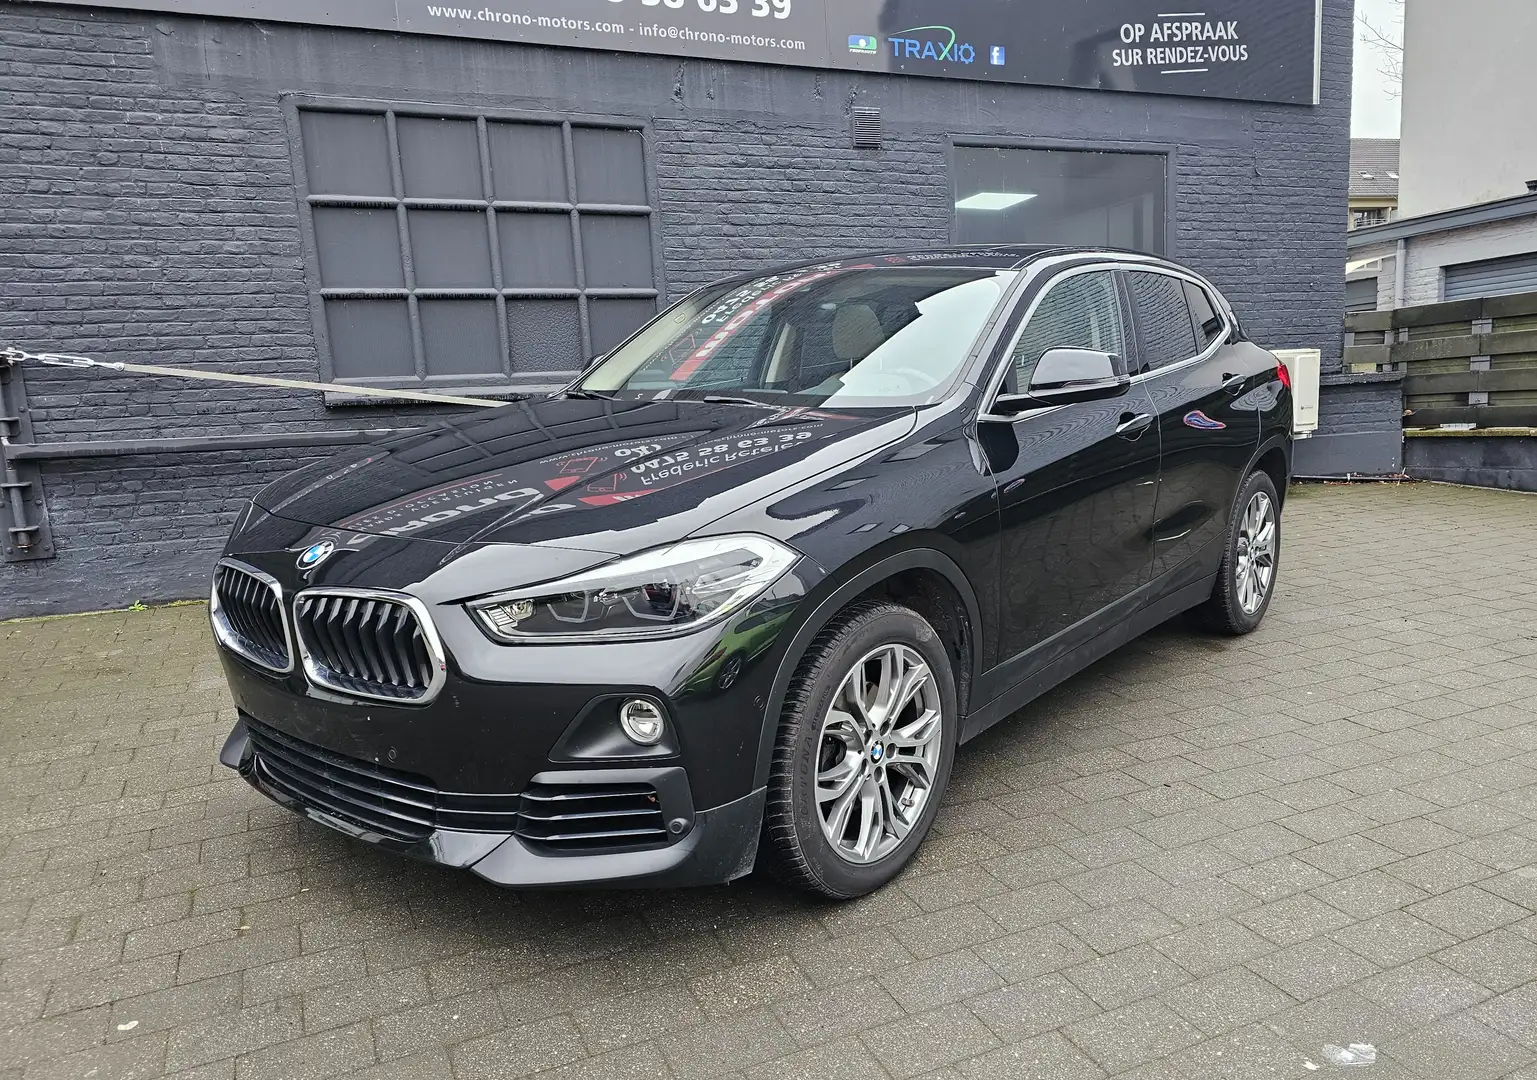 BMW X2 T-Pano Cuir Led Sg Sport Pdc Cruise Controle Negro - 2